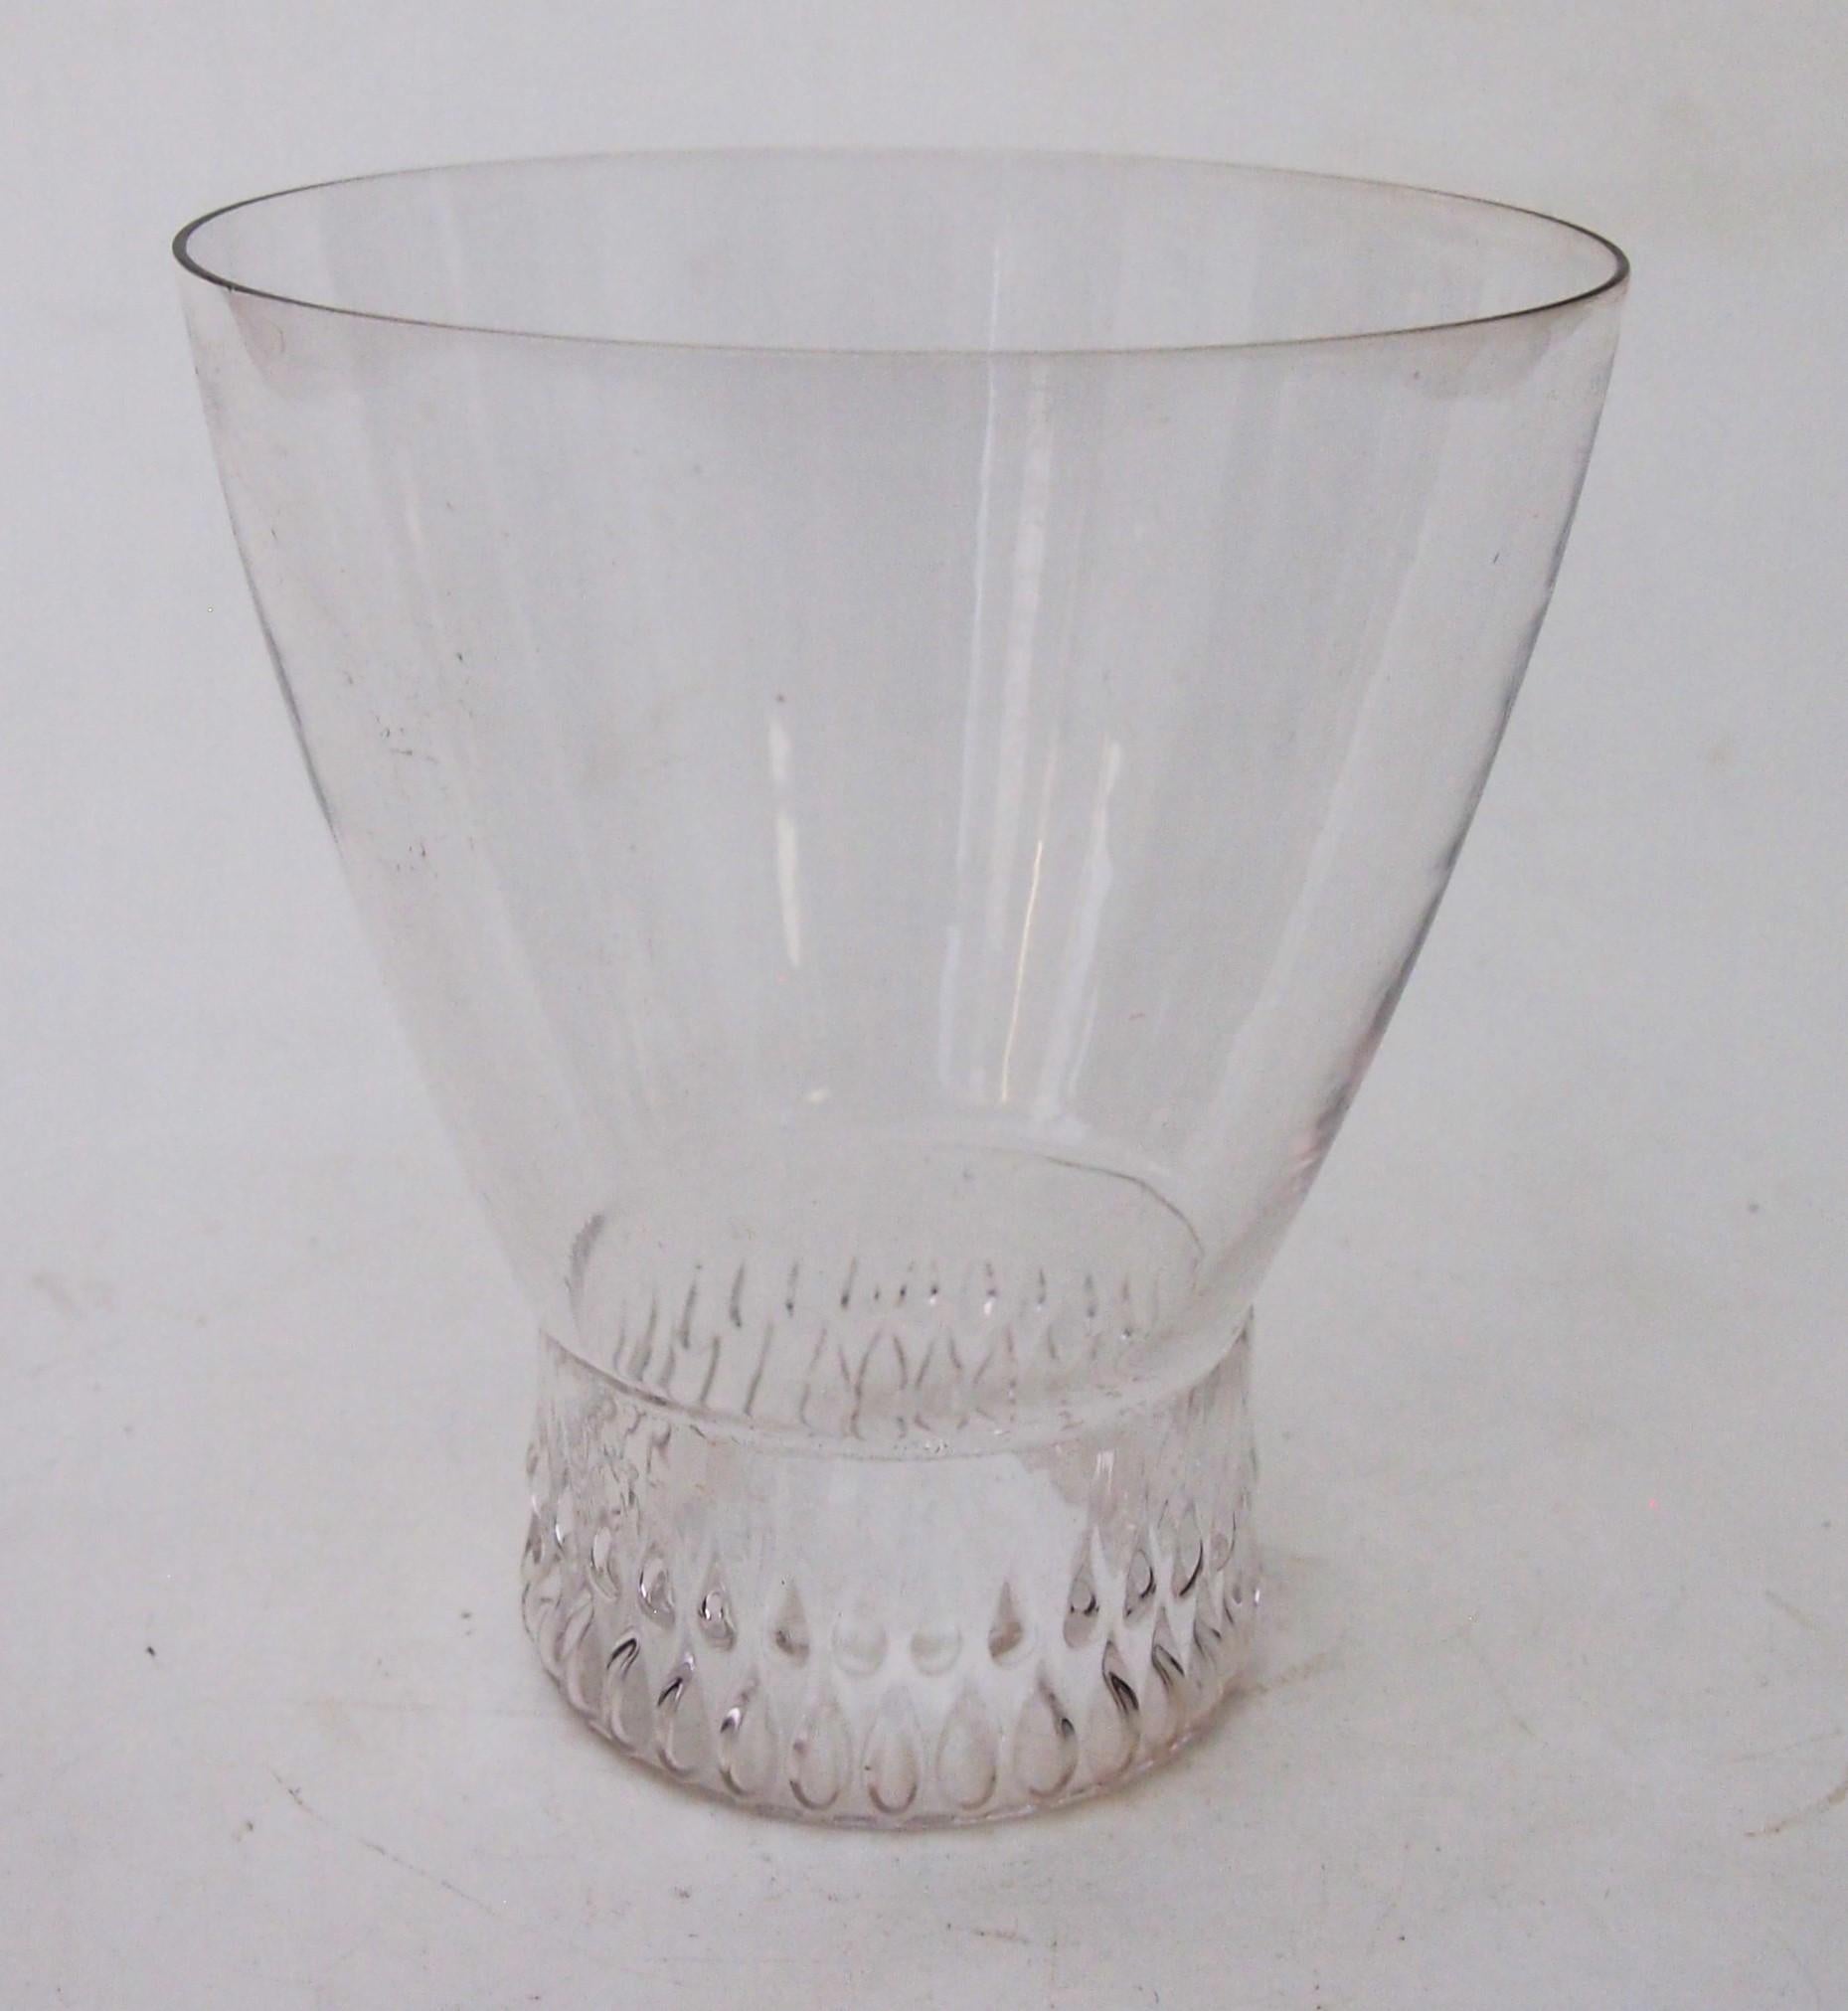 Rare René Lalique Clos St Odile glass c 1921/2 -signed to the base 'R Lalique'  and 'Clos St Odile'. In the early Black edition of the Lalique bible by Felix Marcilhac it was vaguely listed as non retail glass A on page 767 -without a height as then